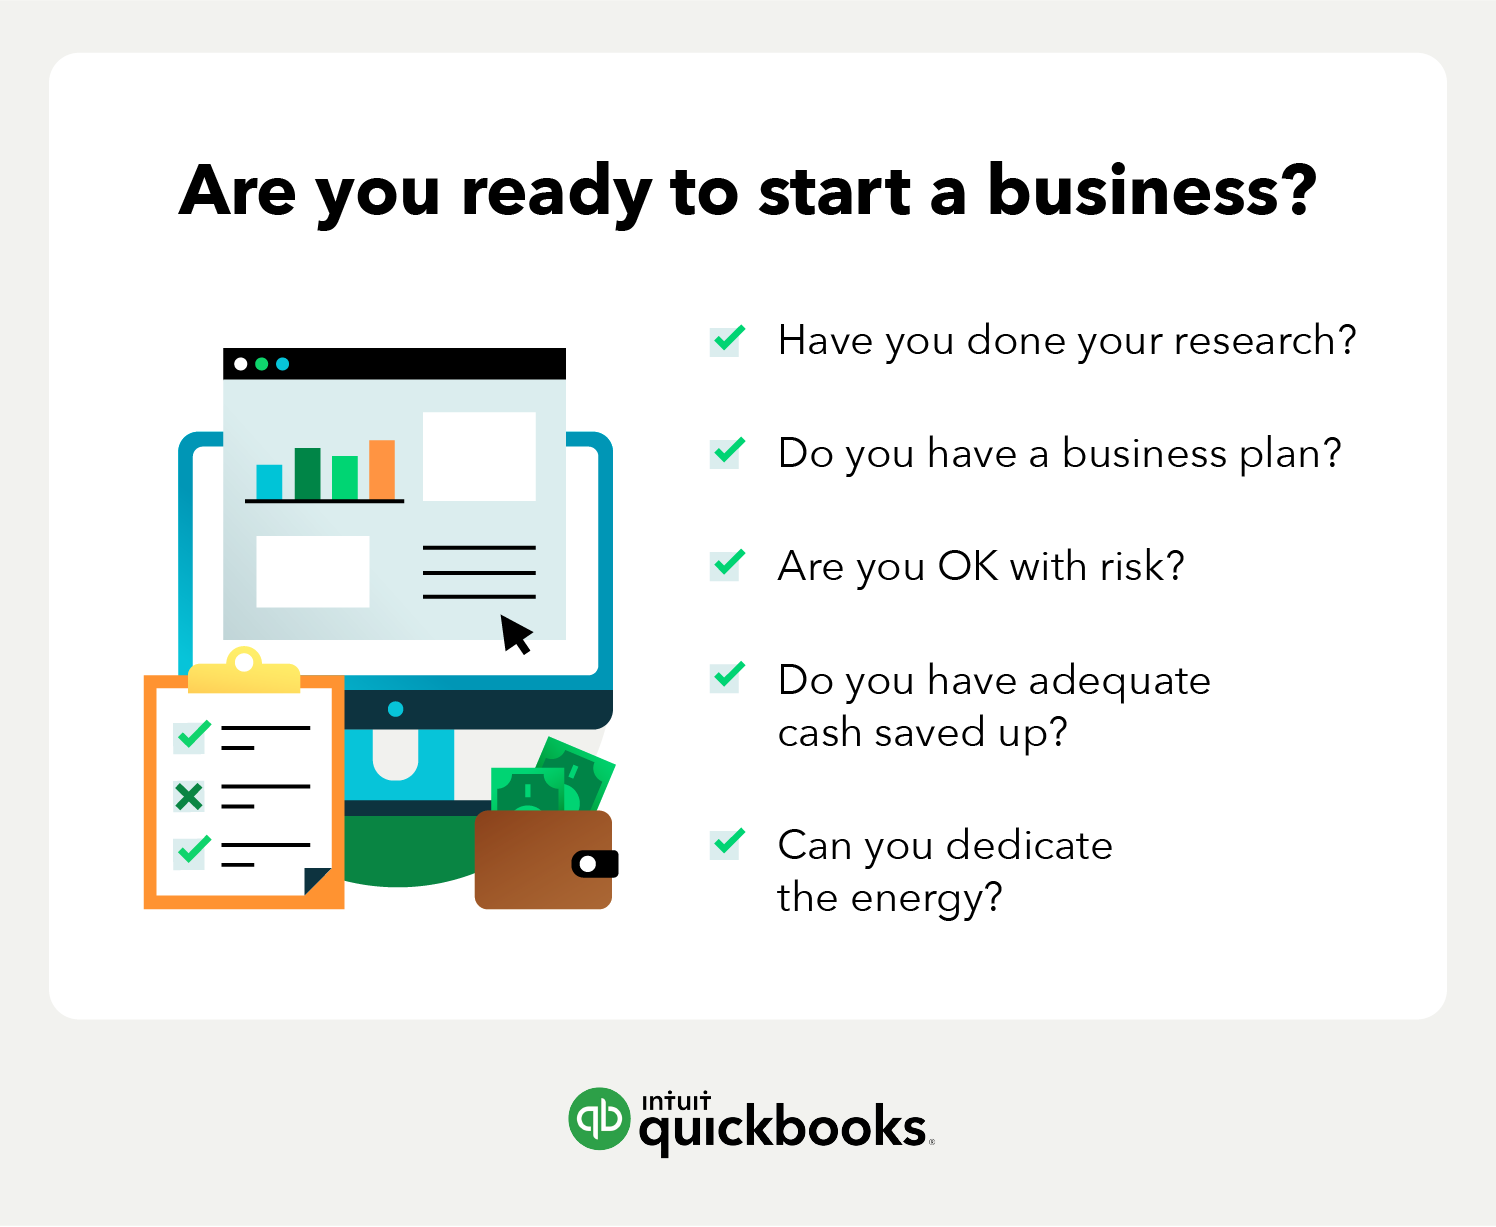 Are you ready to start a business?